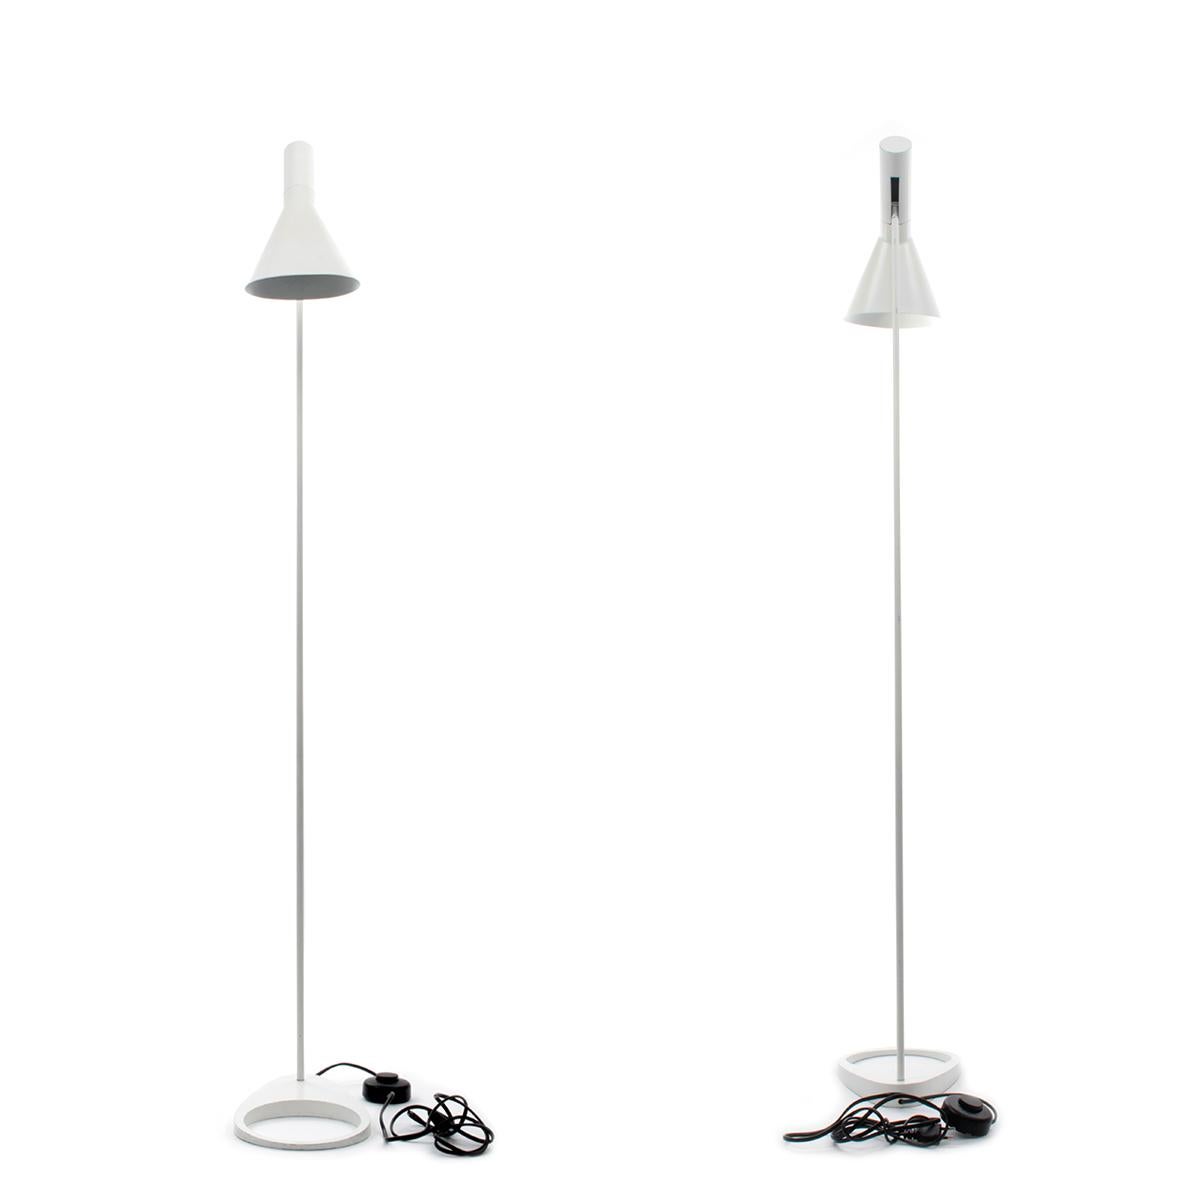 Aj Floor lamp - a classic floor lamp designed by the world-renowned Arne Jacobsen in 1957, produced for Louis Poulsen - and this vintage edition is in very good vintage condition! Iconic Danish lighting design!

Timeless floor lamp with its sleek